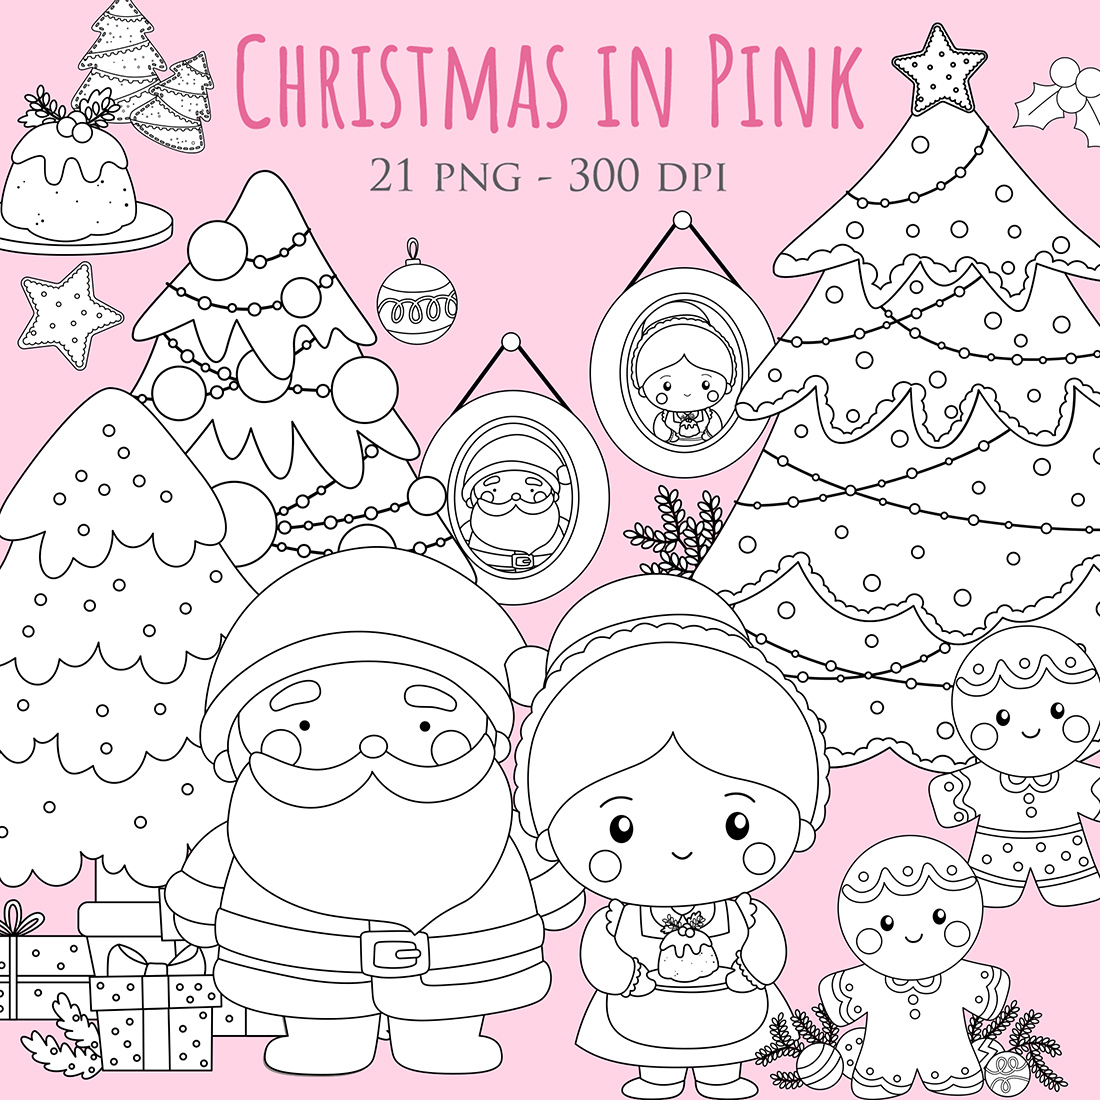 Cute Christmas in Pink Decoration Background Ornaments Accessories Tree Santa Claus Gingerbread Grandmother Character Cartoon Digital Stamp Outline cover image.